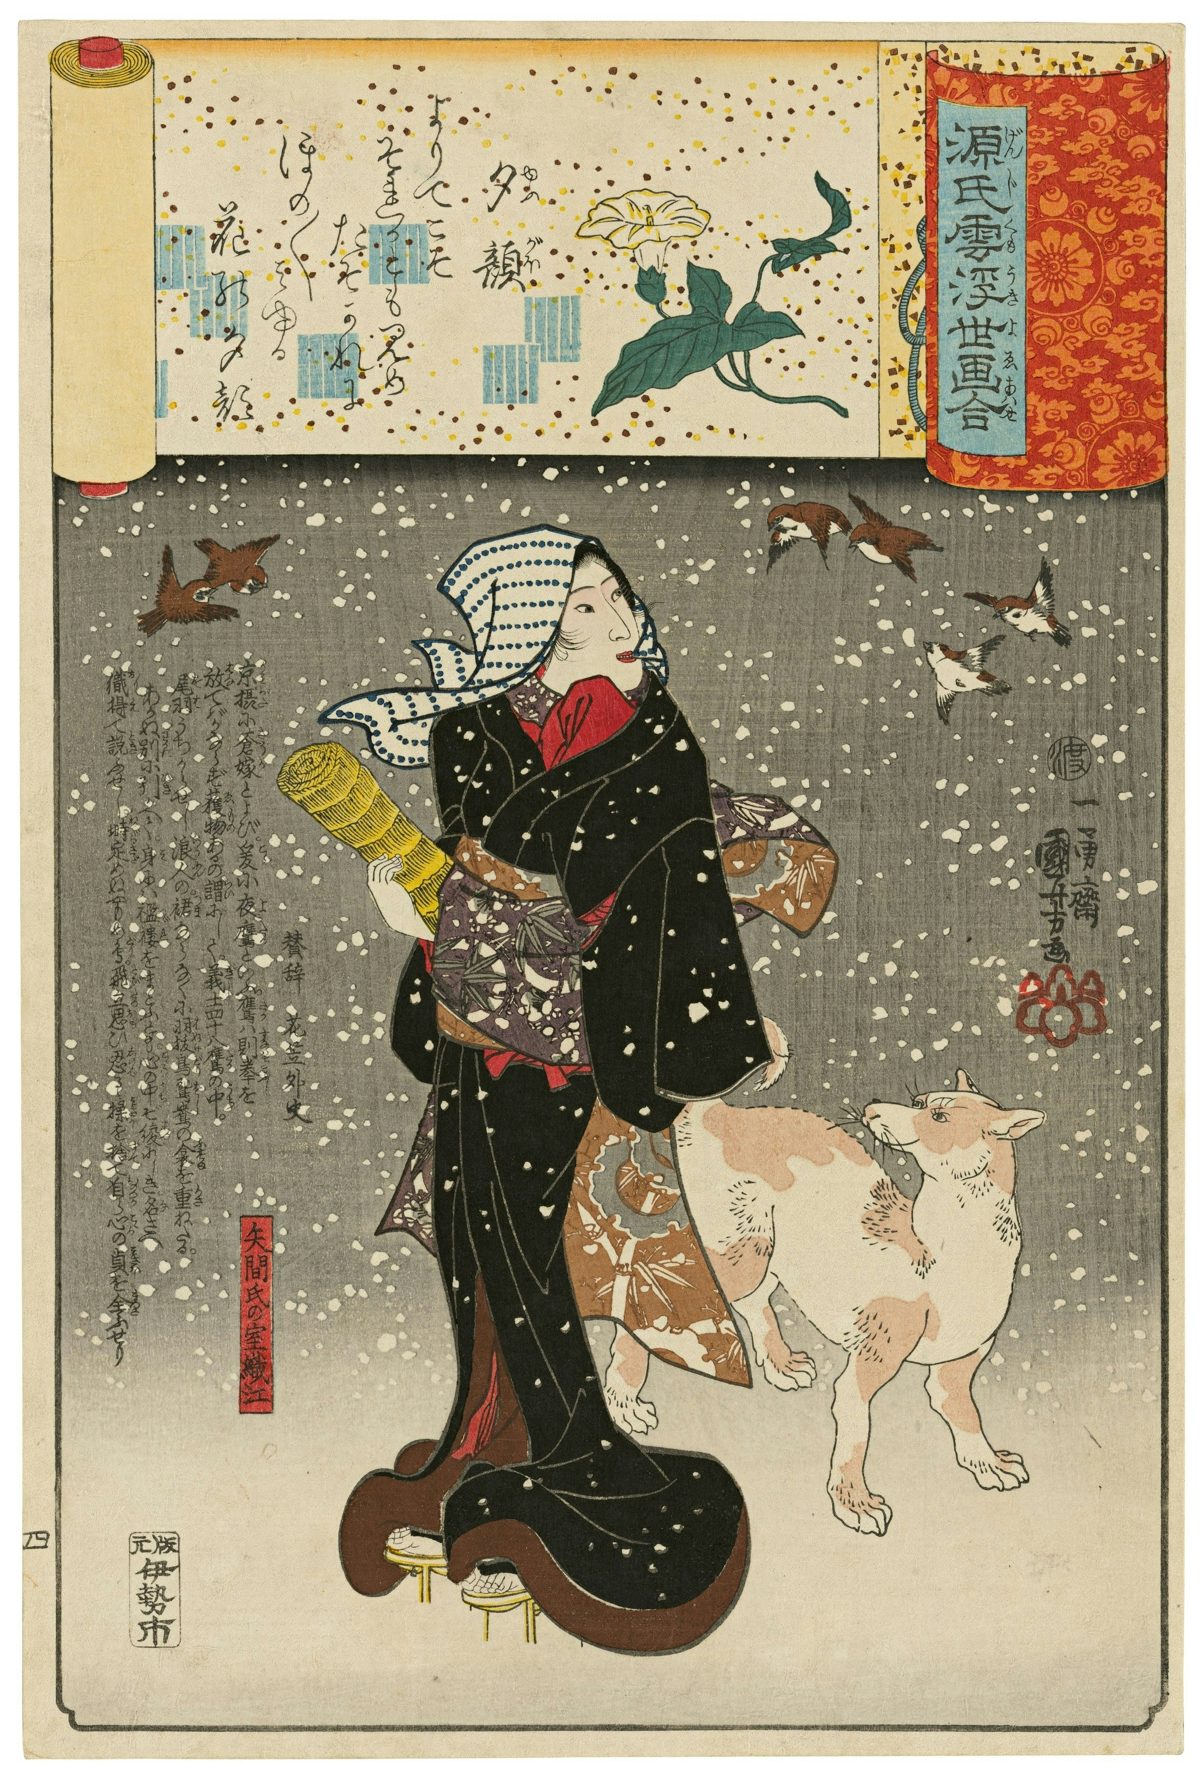 Utagawa Kuniyoshi, Lady of the Evening Face: Yazama’s Wife Orie, from the series Scenes Amid Genji Clouds Matched with Ukiyo-e Pictures, 1845–46. Image © The Metropolitan Museum of Art.